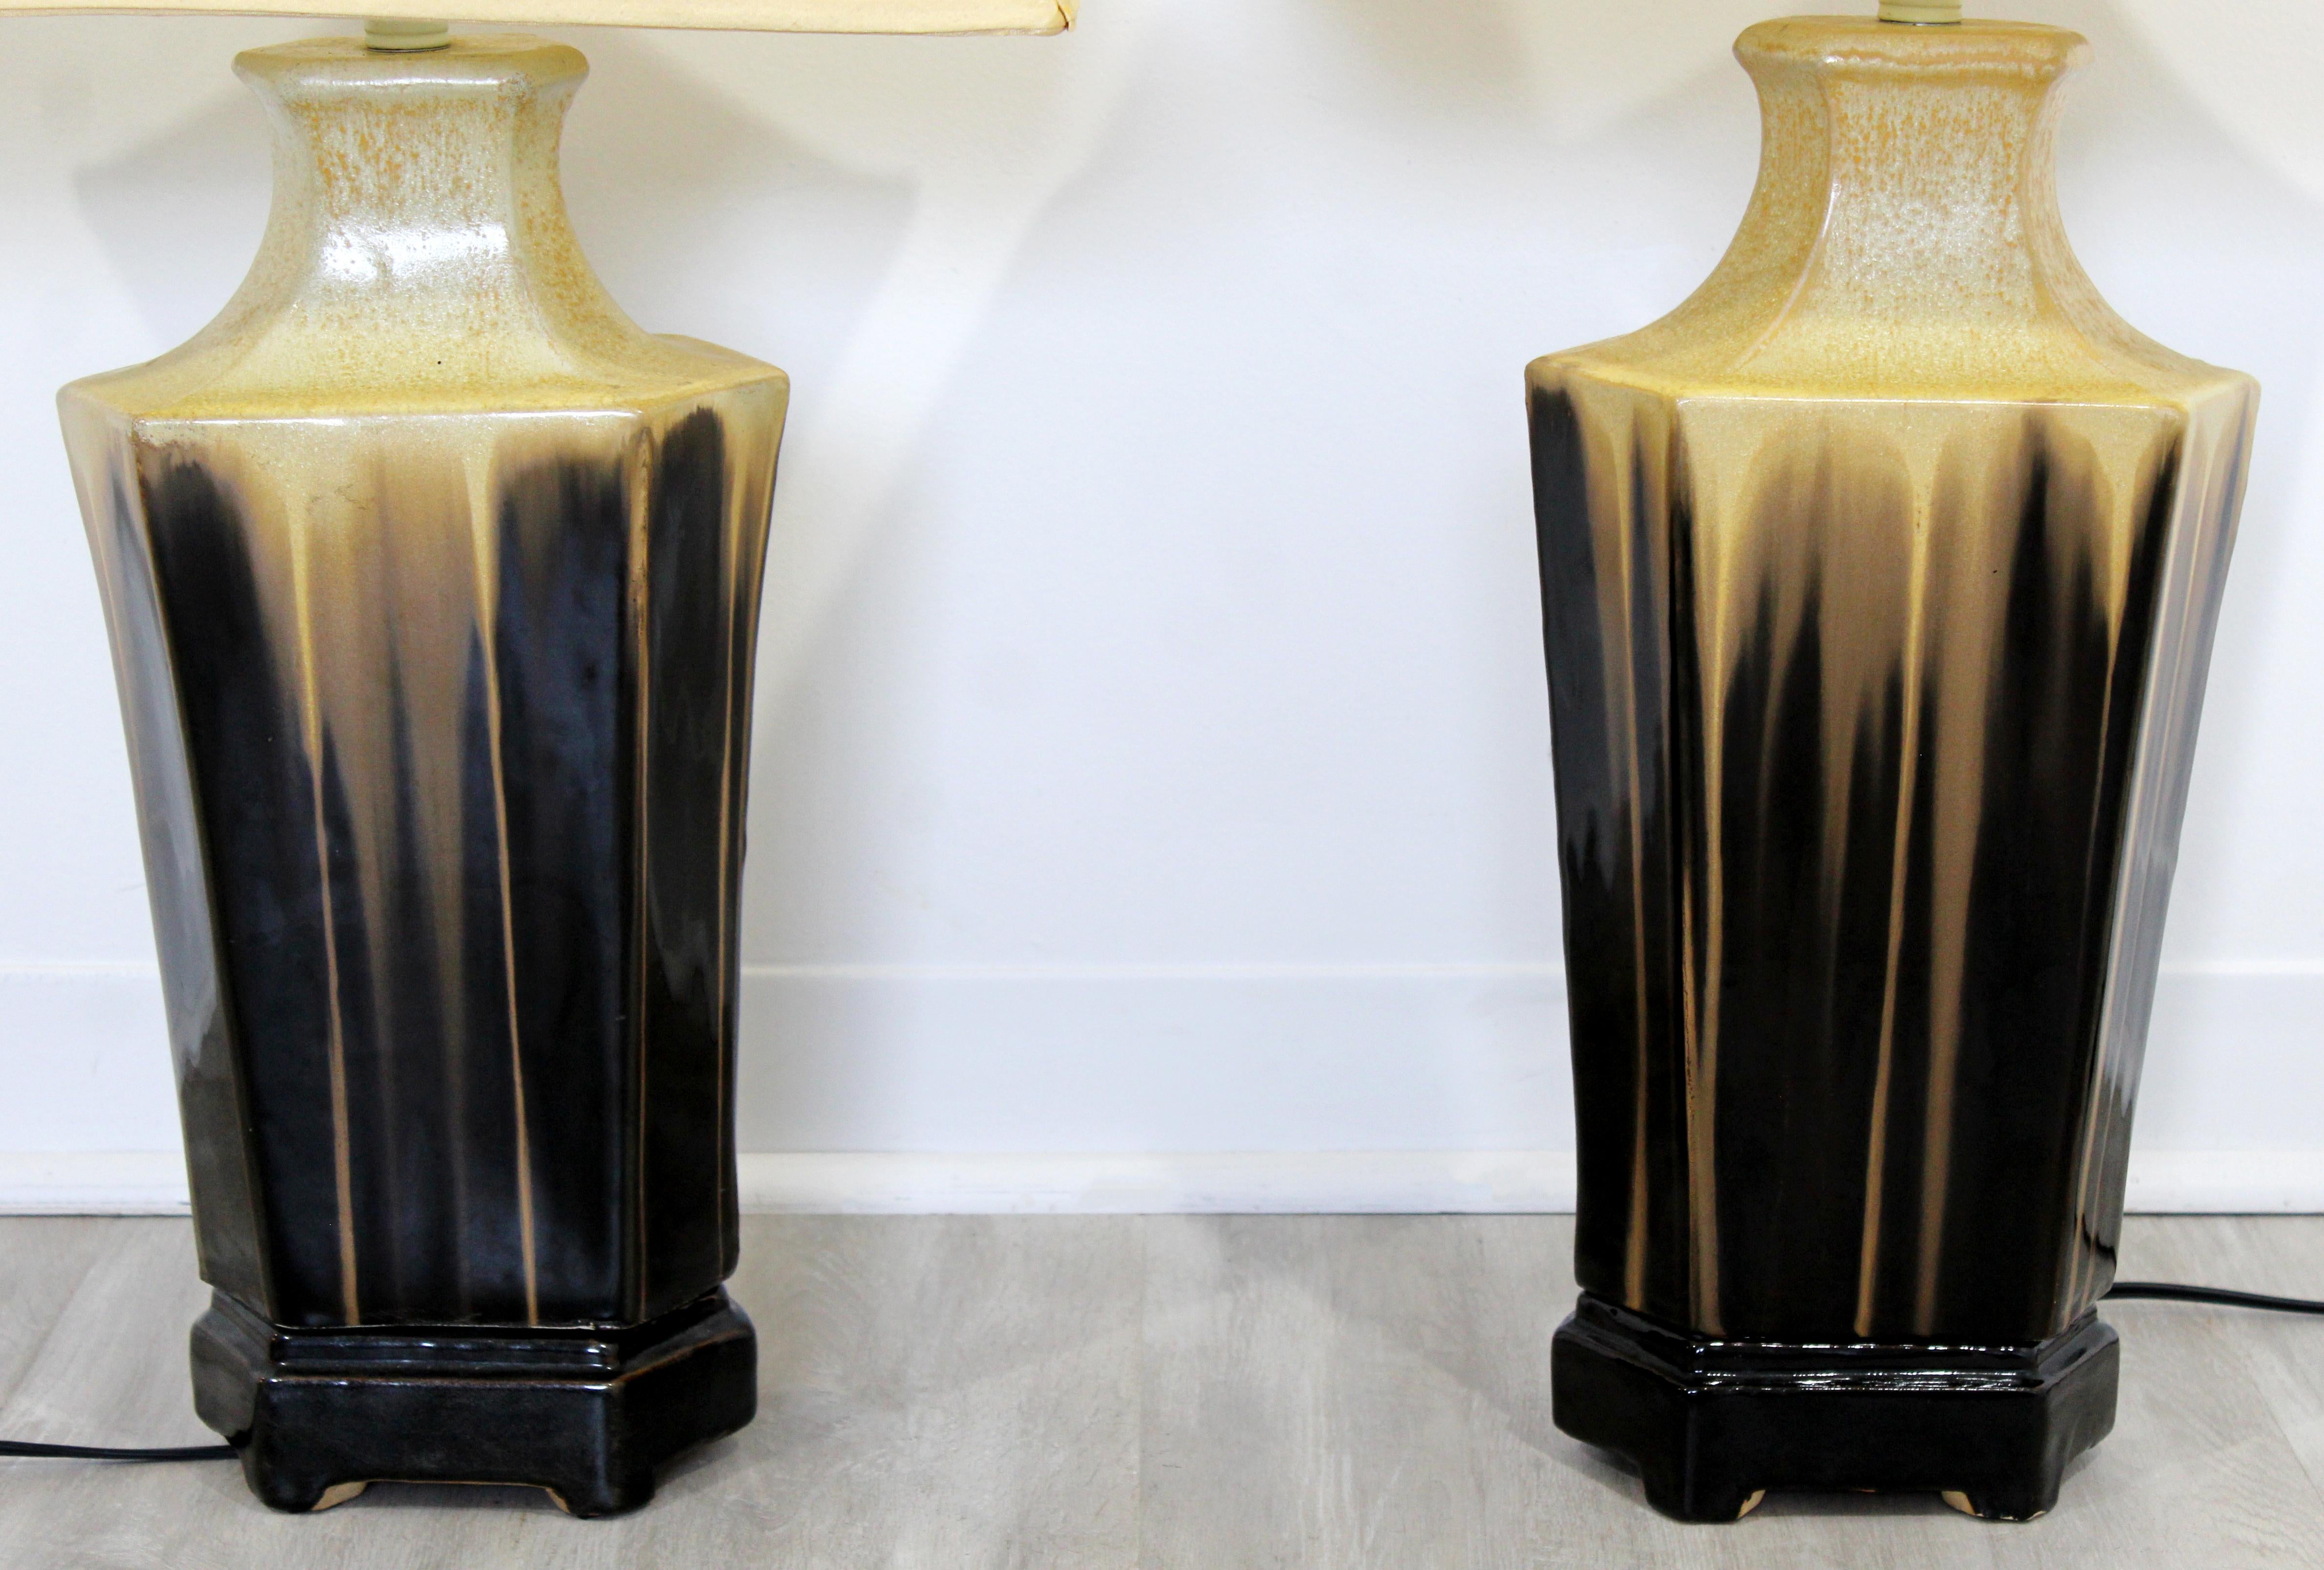 For your consideration is a stunning pair of brown, drip glazed ceramic table lamps, circa 1960s. In excellent condition, but missing finials. The dimensions of the lamps are 9